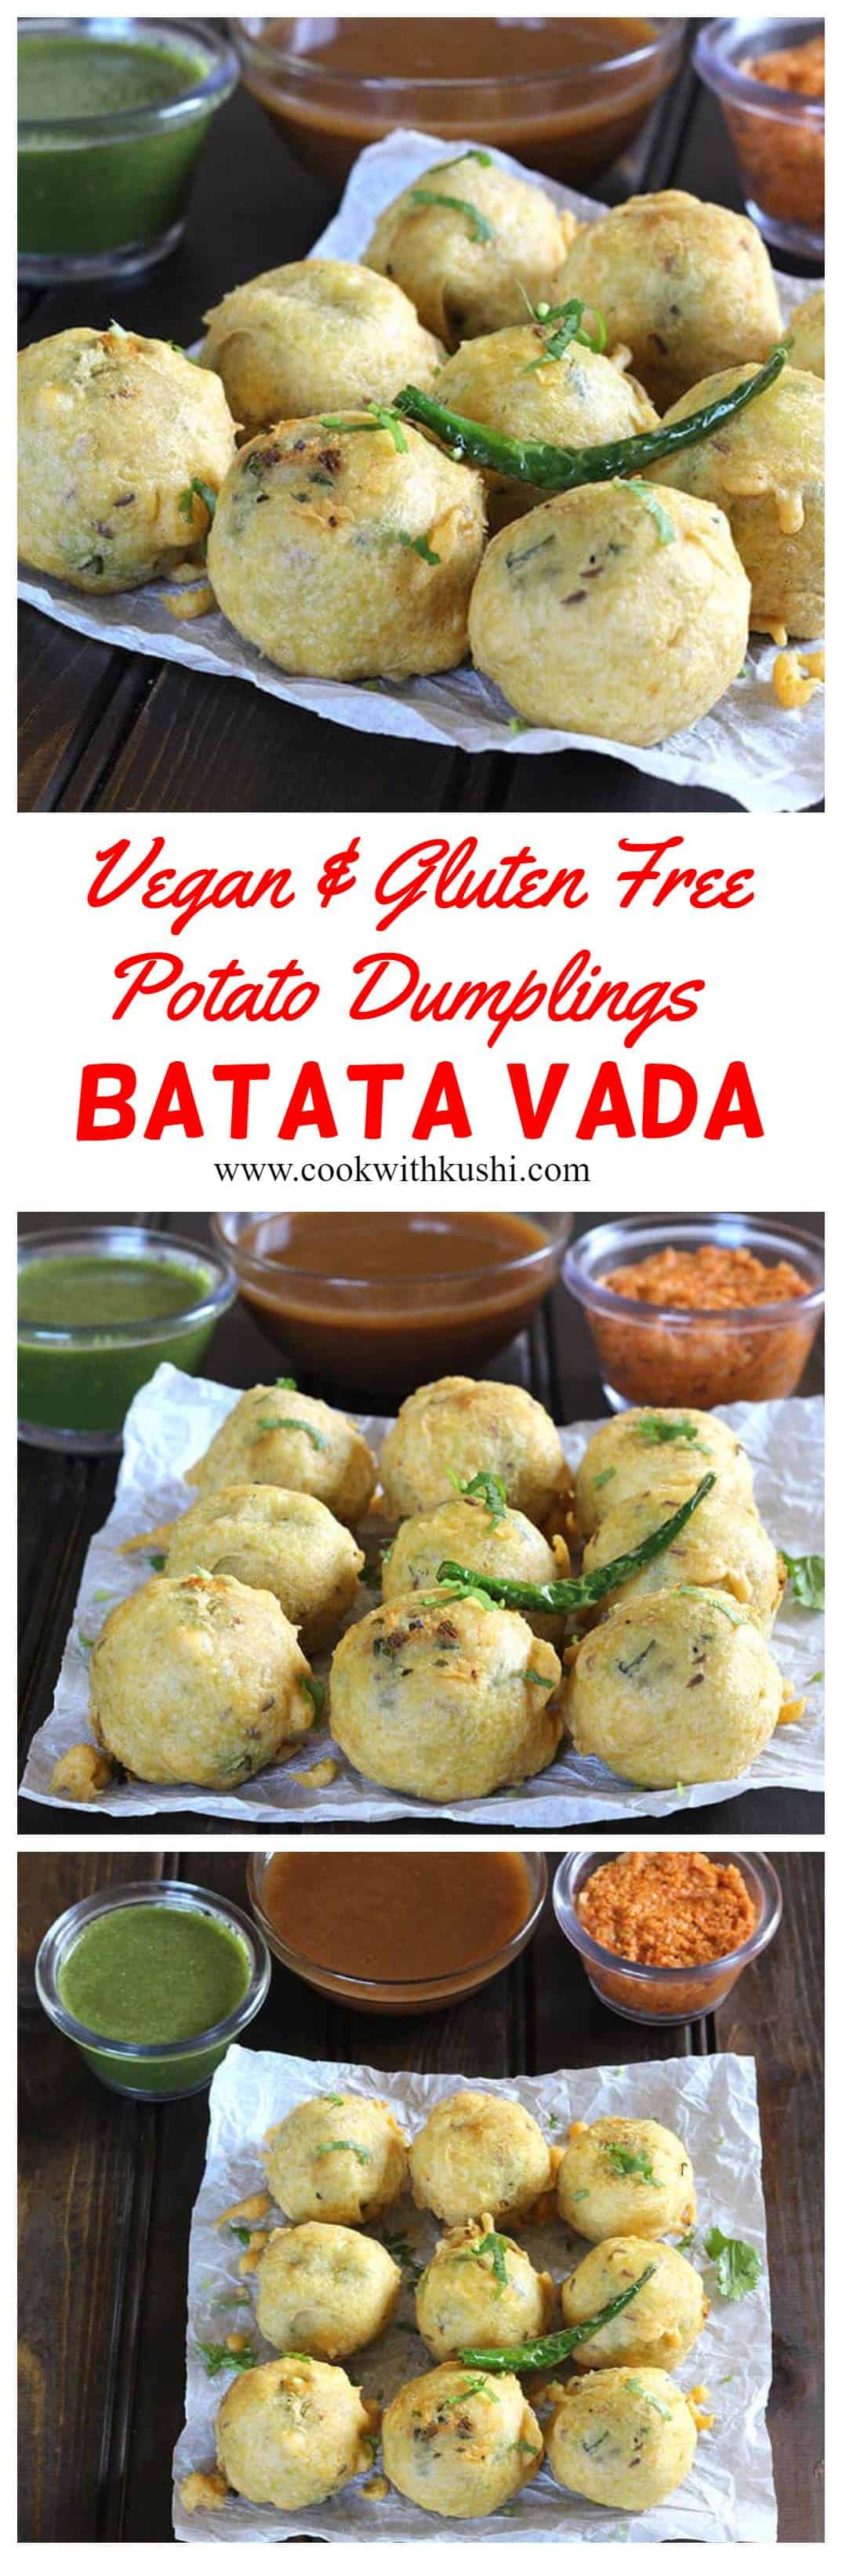 Batata Vada or Fried Potato Dumpling is a simple and easy to make, spicy and delicious Indian snack prepared using potatoes and aromatic spices in less than 30 minutes. This potato recipe is gluten free and vegan. #potatorecipes #aloo #aloobonda #vadapav #batatavada #vegansnacks #eveningsnacks #fastfood #streeetfood #indianrecipes #vegetarianfood #indianburger #potatopatty